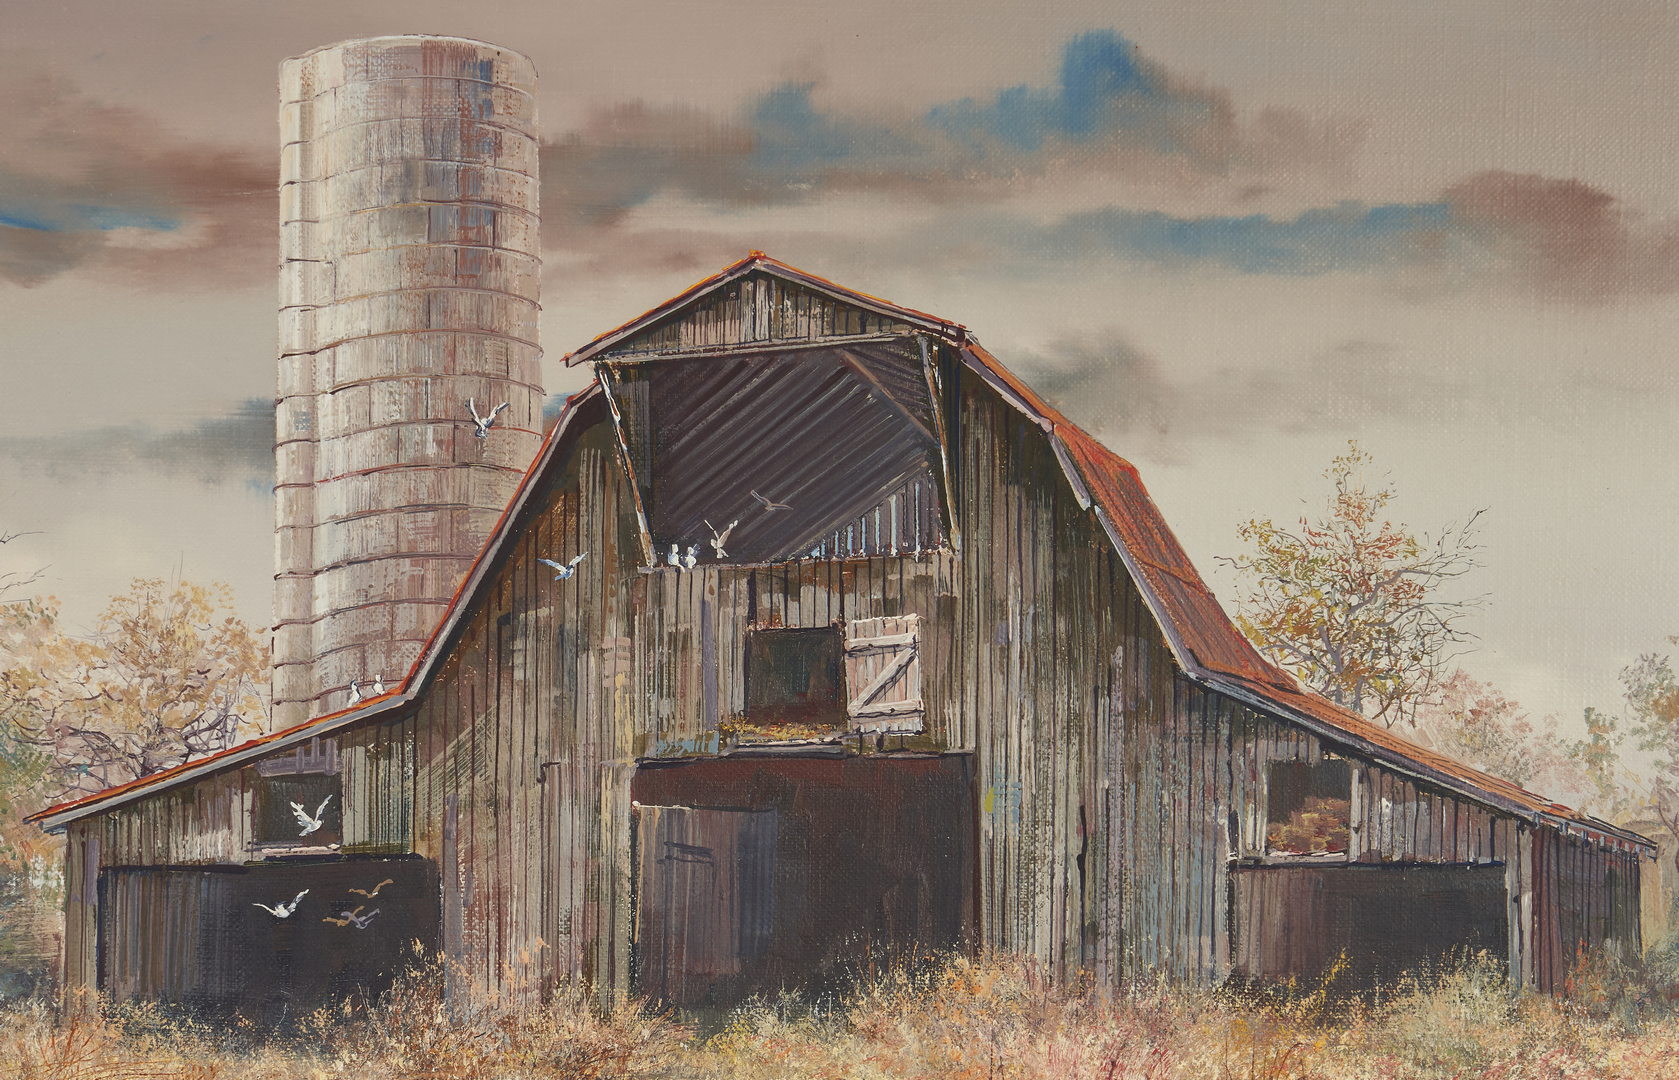 Lot 274: 2 Marion Cook Paintings, Barn and Daisies